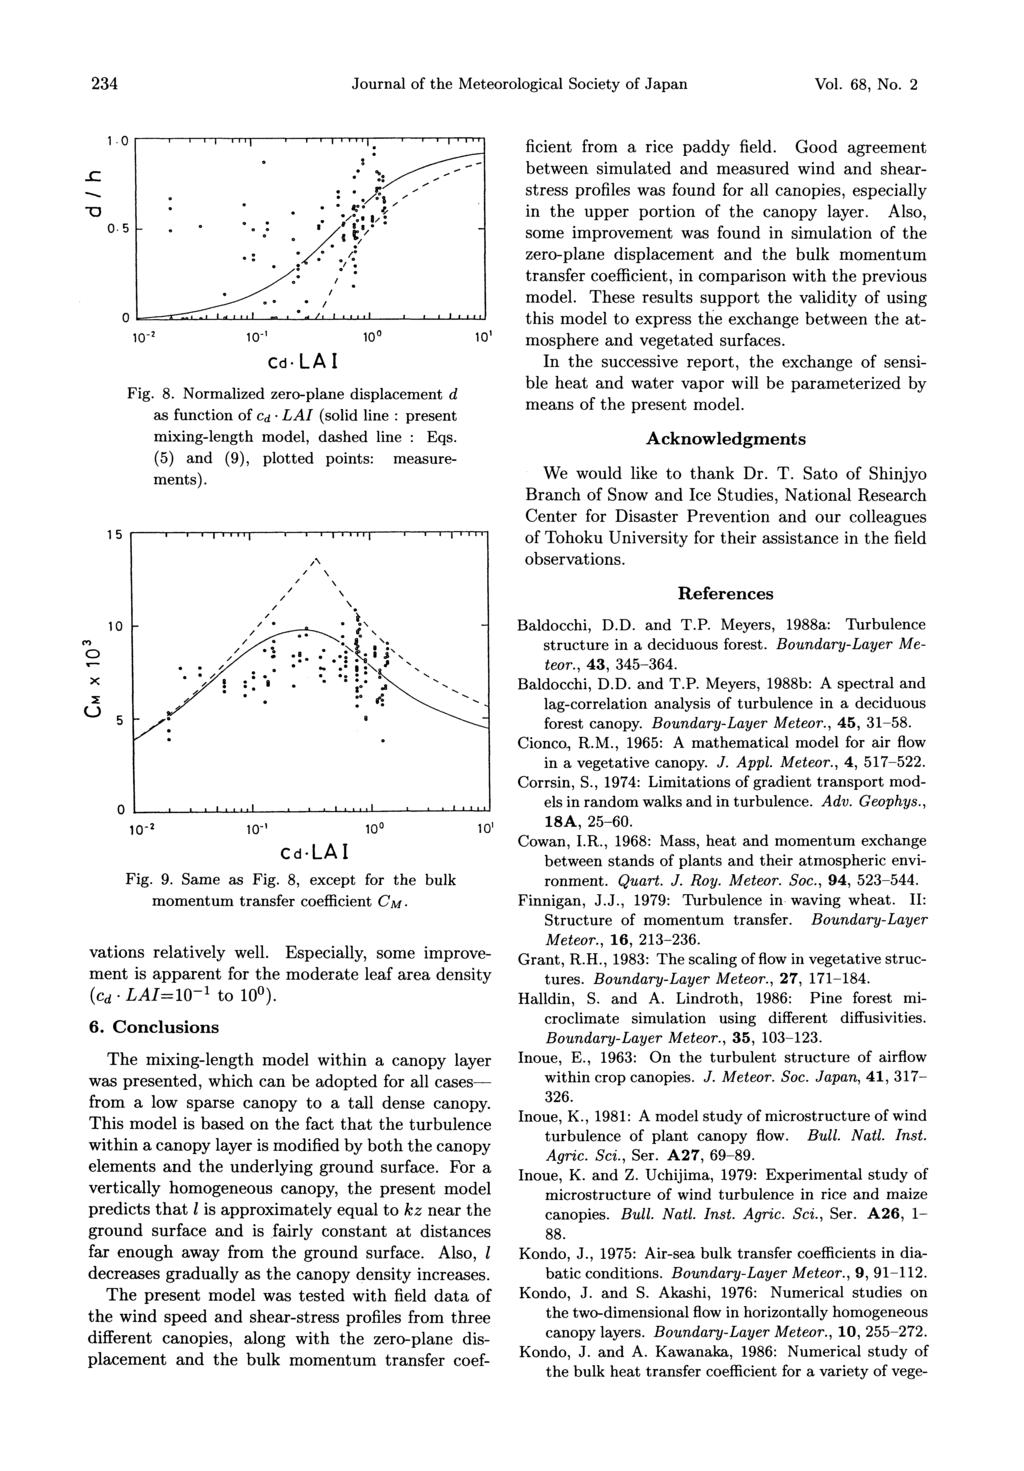 234 Journal of the Meteorological Society of Japan Vol. 68, No. 2 Fig. 8. Normalized zero-plane displacement d as function of cd LAI (solid line : present mixing-length model, dashed line : Eqs.